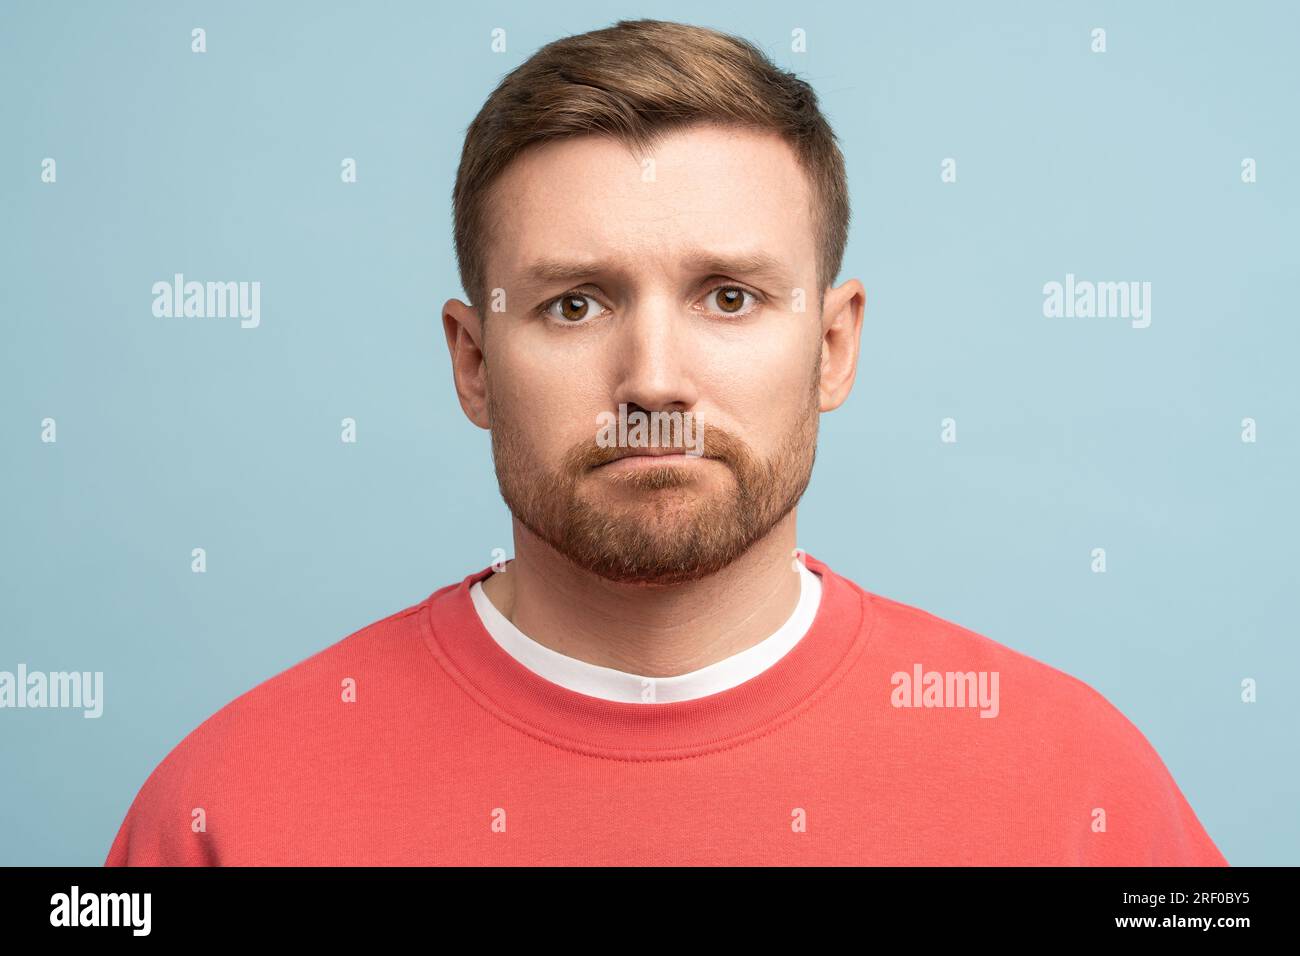 Portrait of middle aged sad confused frustrated man with pursed lips in trouble on blue background. Stock Photo